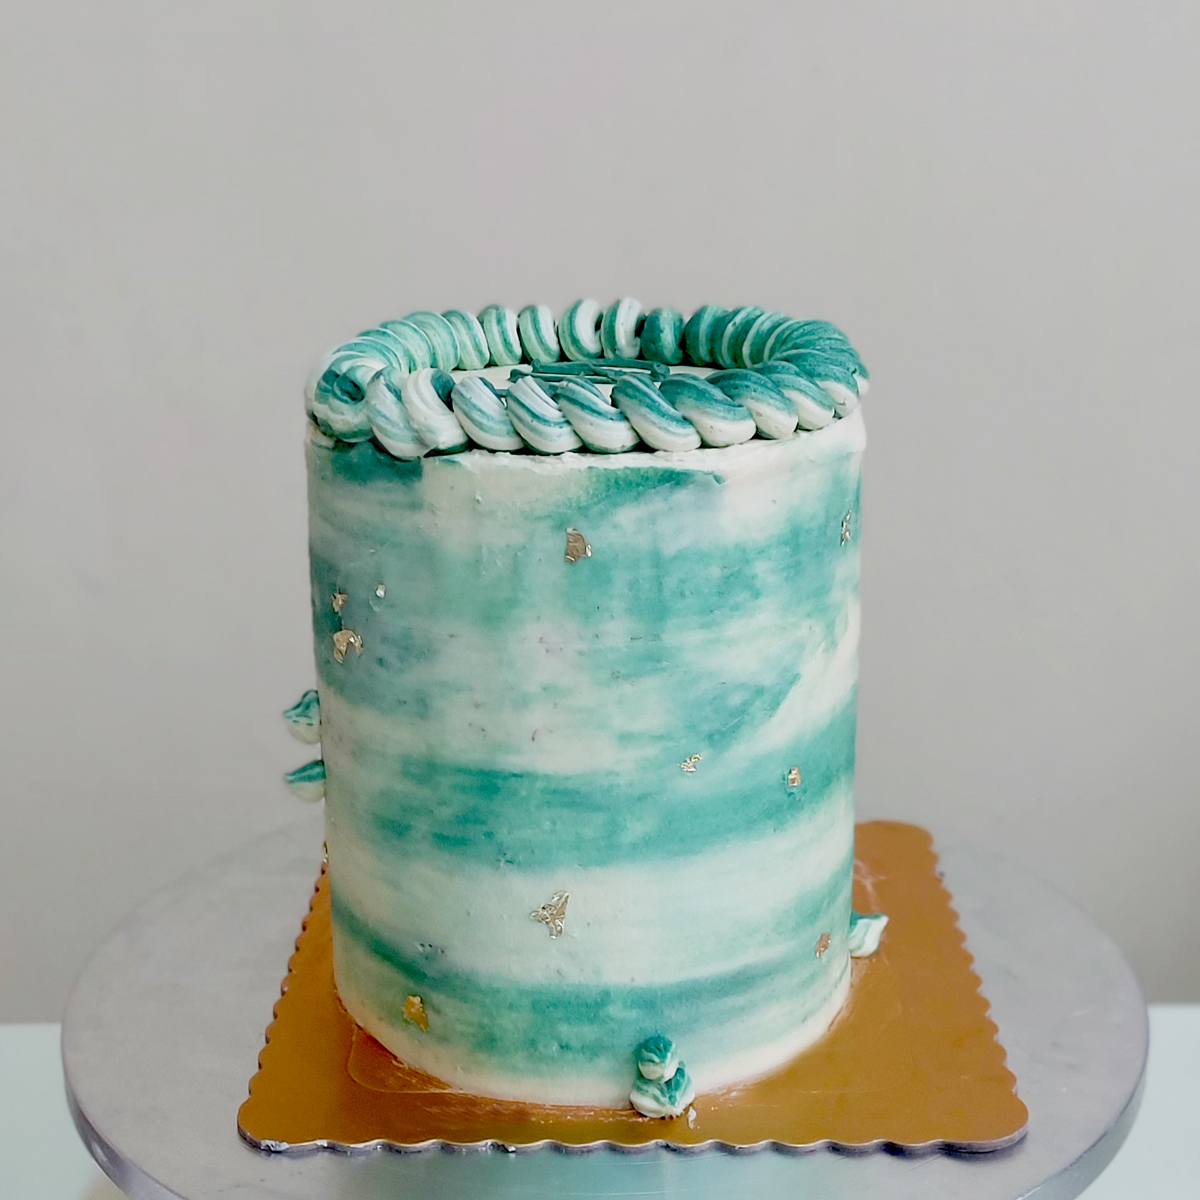 Gradient cake with buttercream